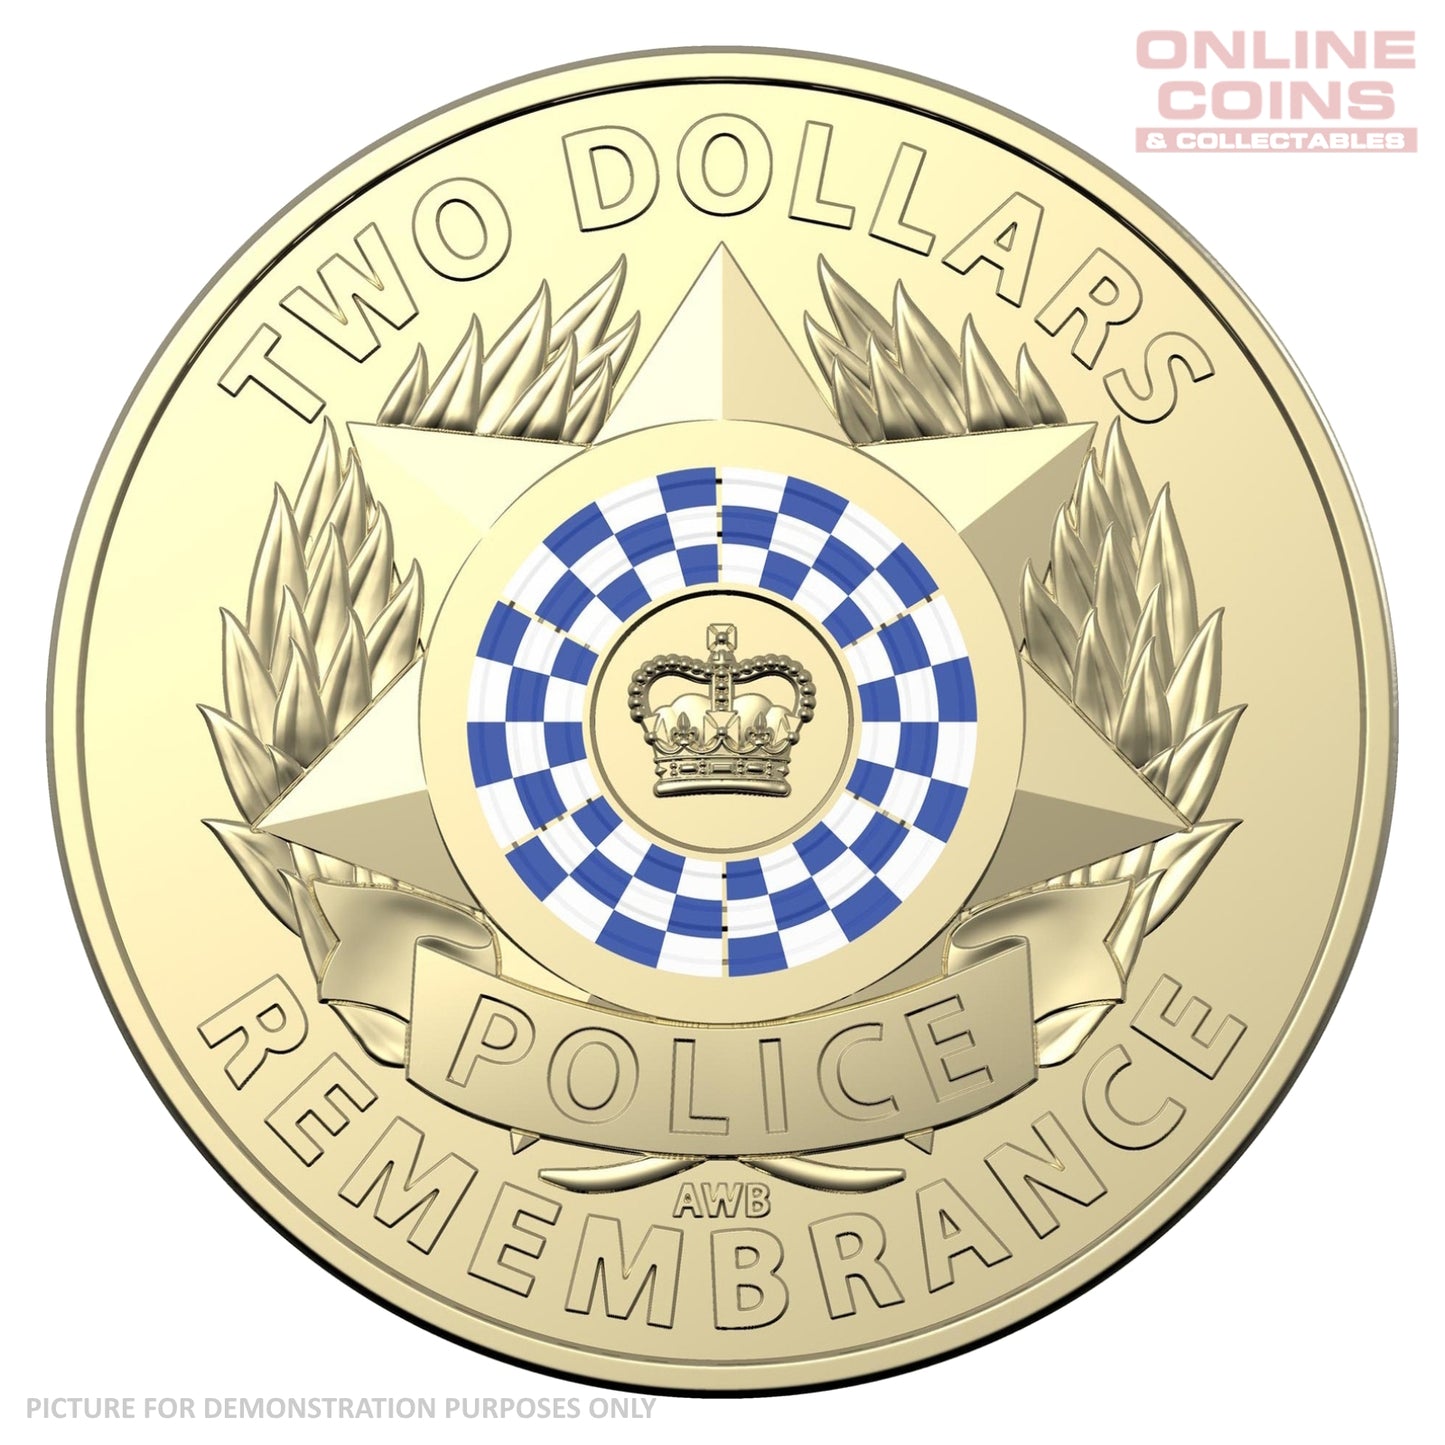 2019 RAM $2 Circulated Coloured Loose Coin - Police Remembrance